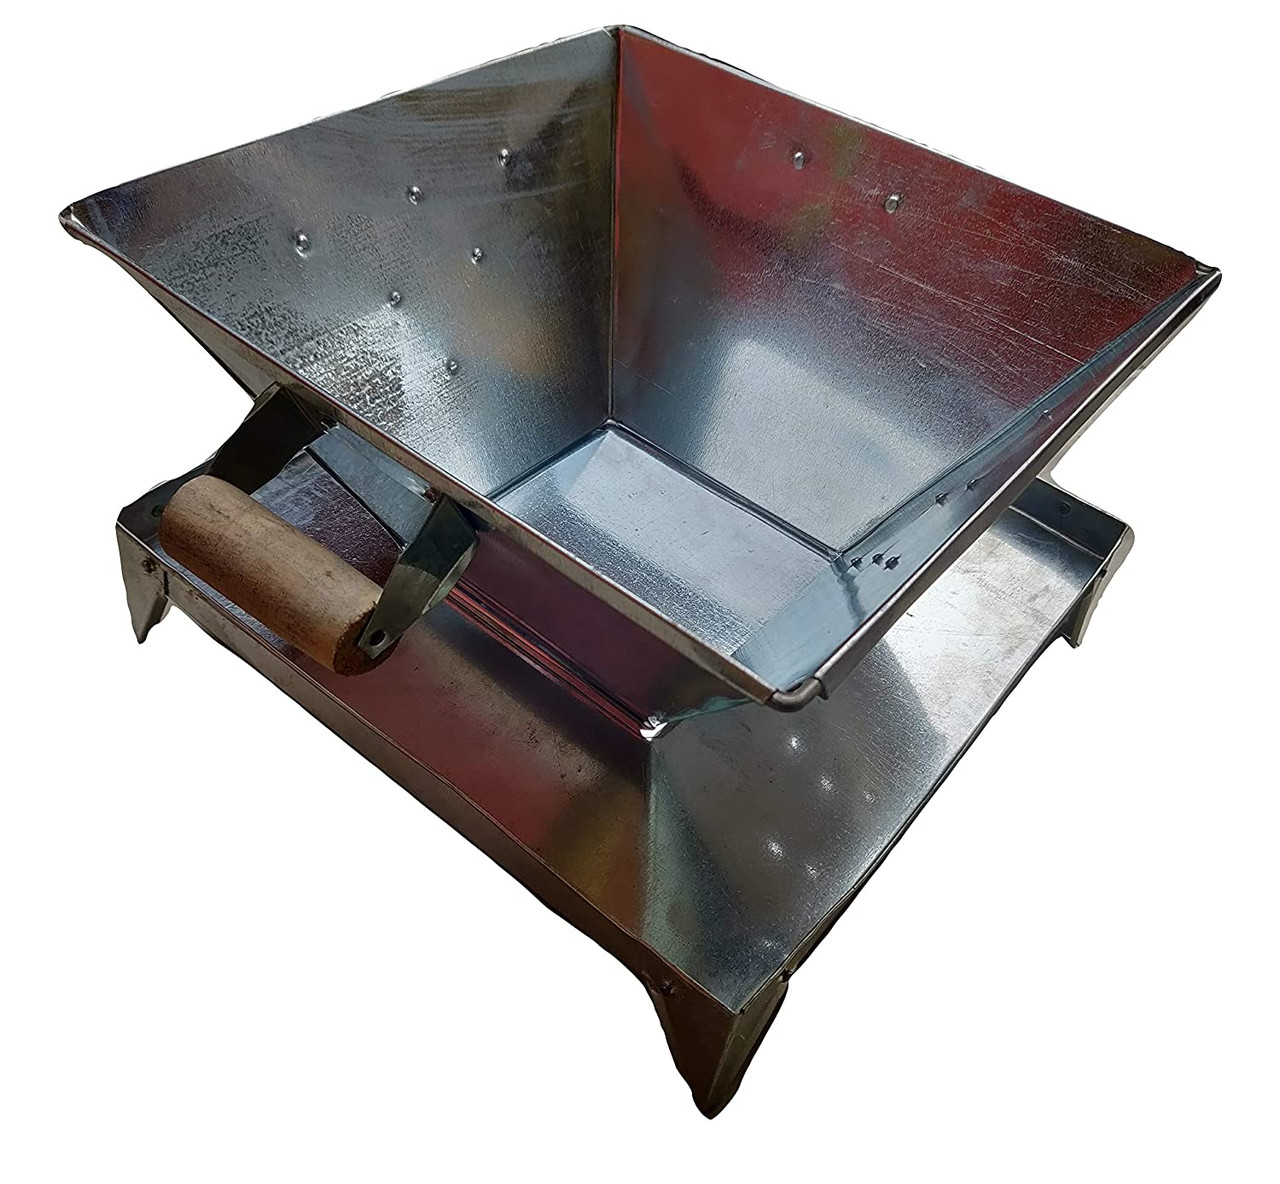 Made up with steel Steel Hawan Kund for Pooja rituals 5 x 5 x 4 inches 